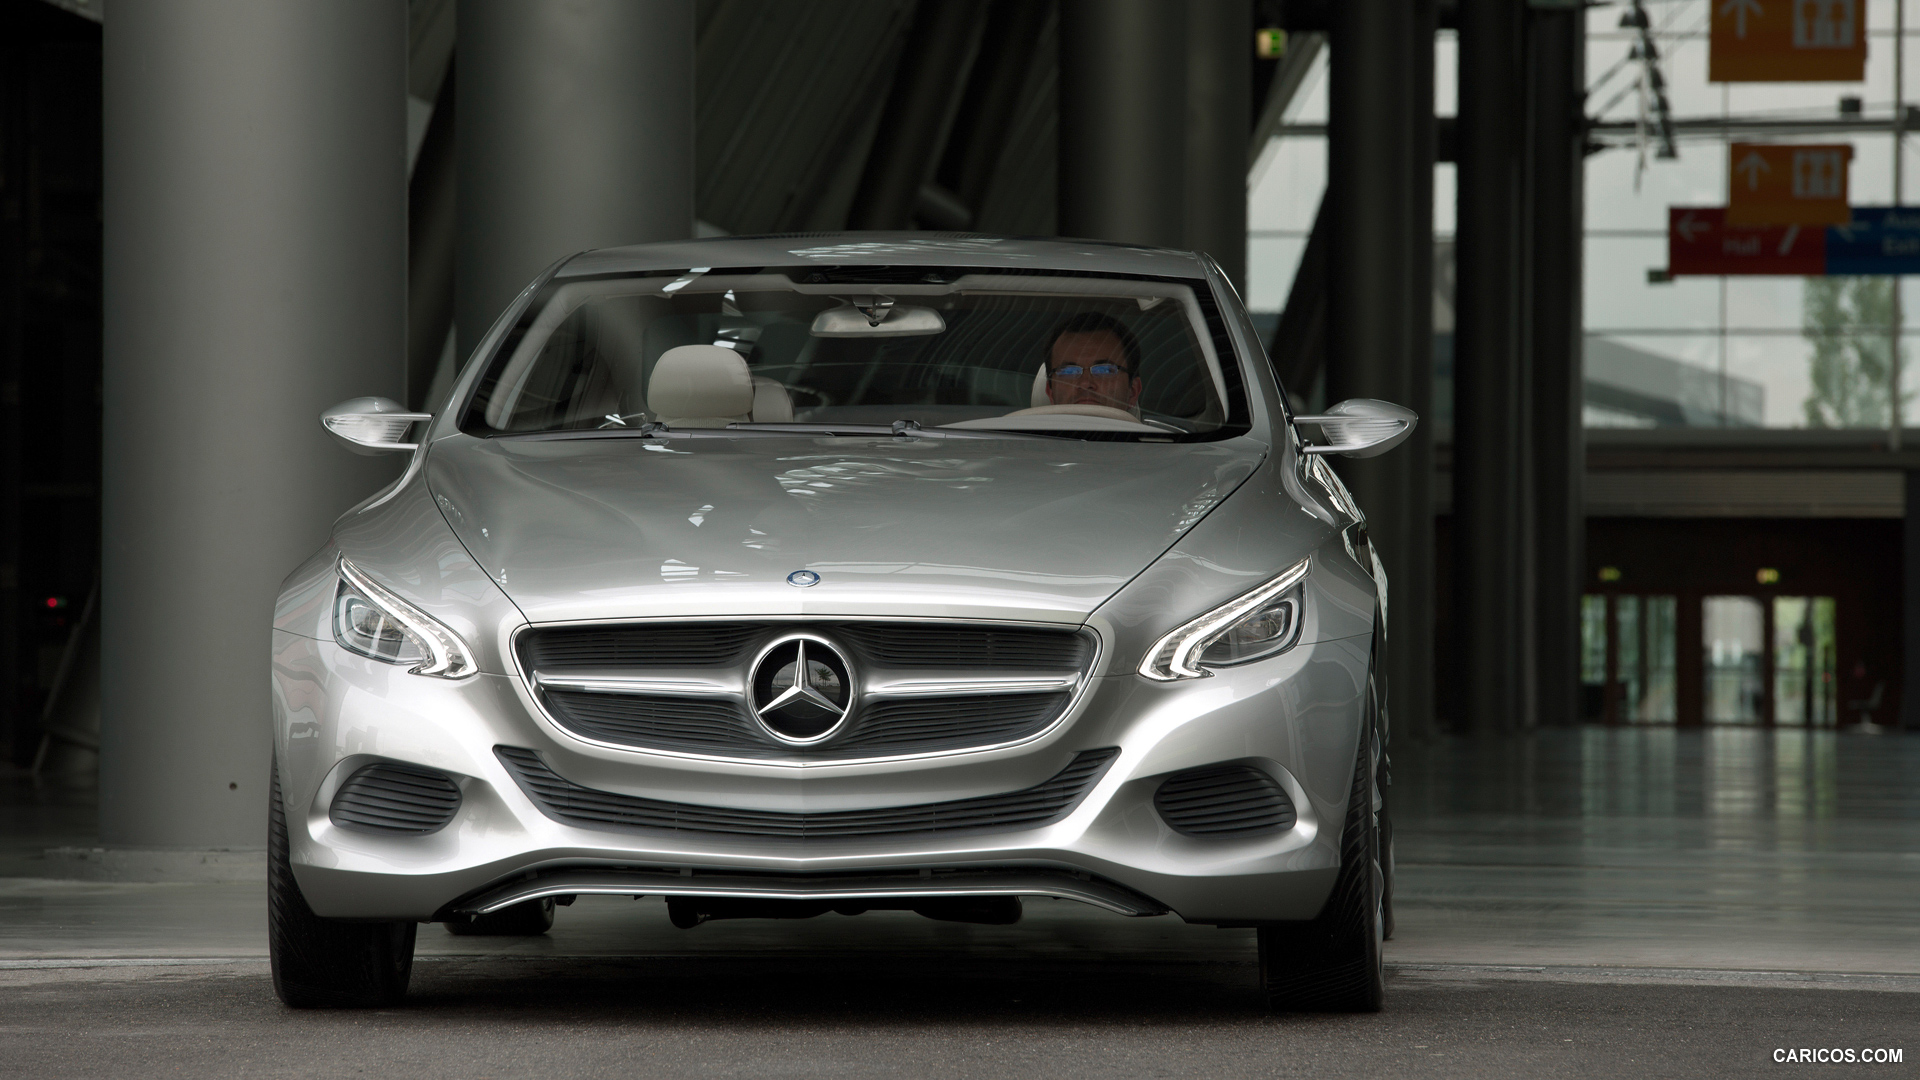 Mercedes-Benz F800 Style Concept (2010)  - Front Angle , #18 of 120